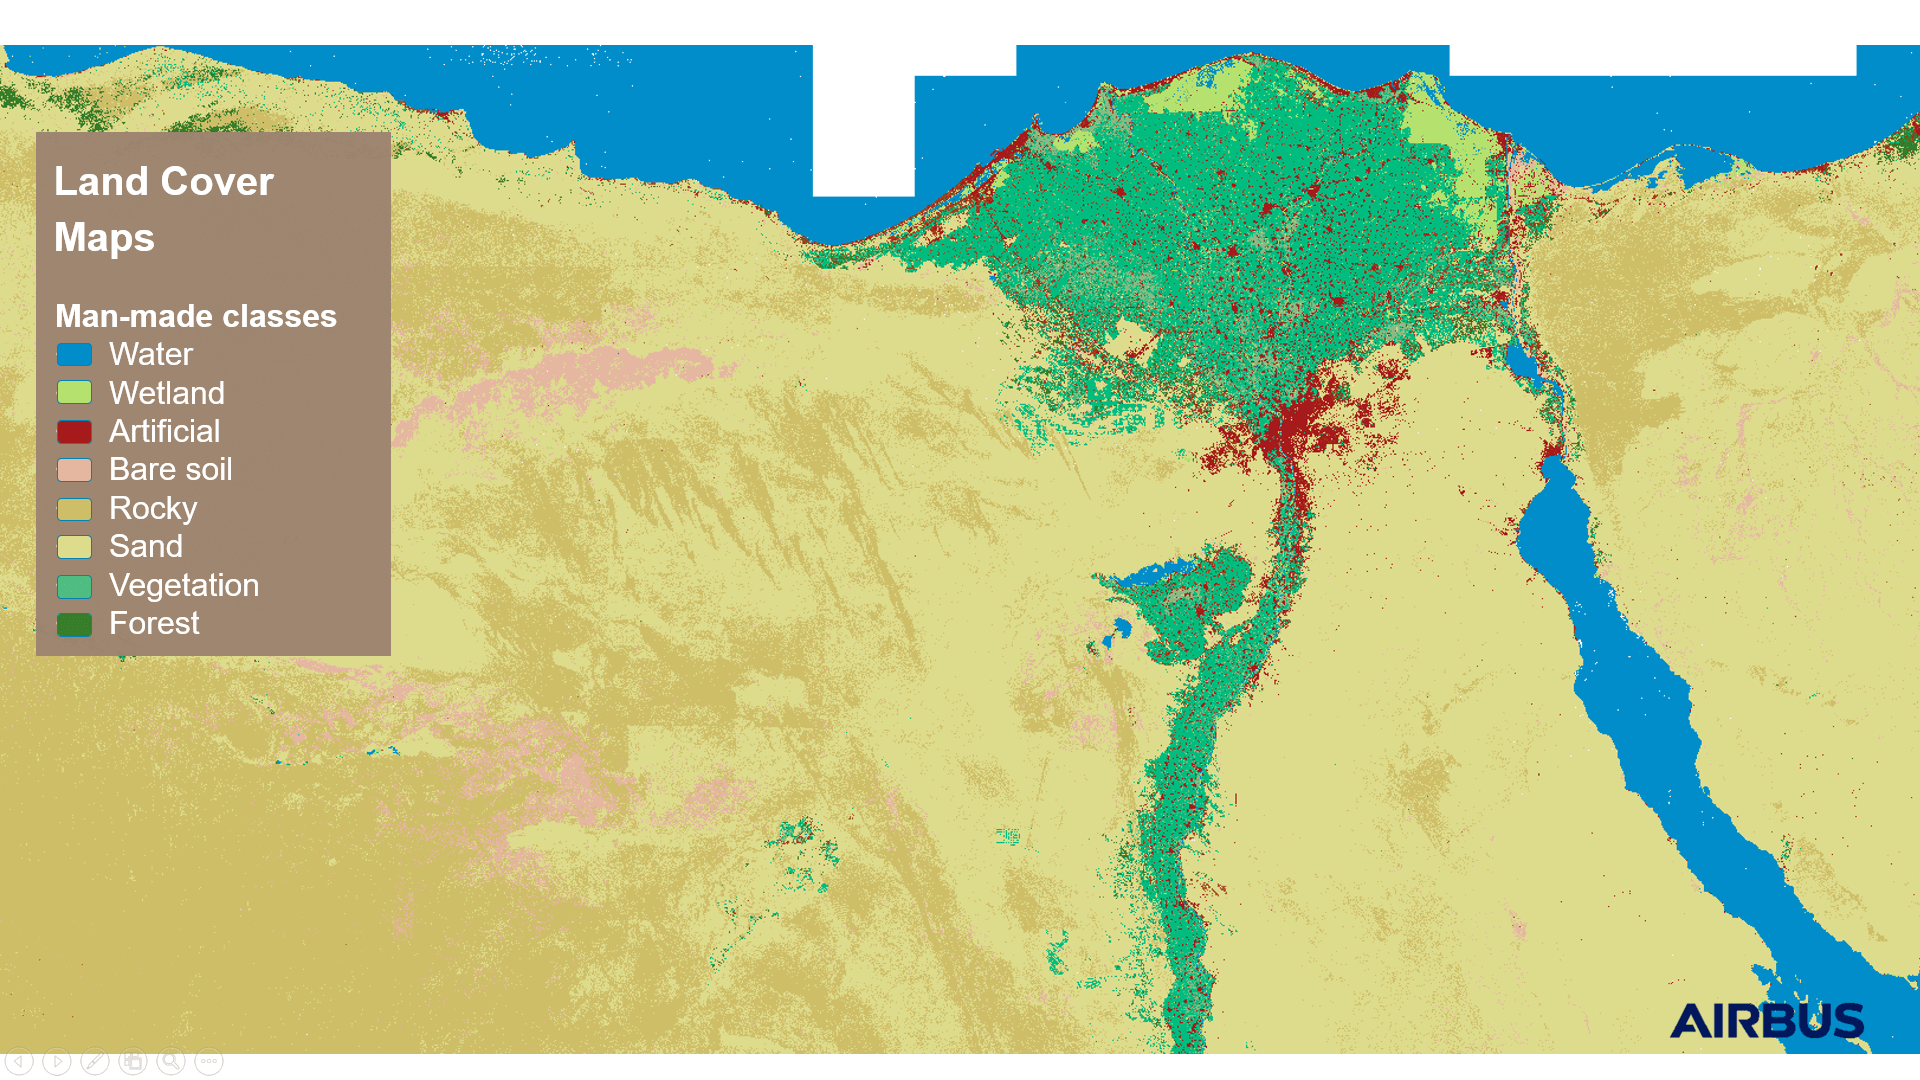 Land cover maps over Egypt, powered by Airbus analytics